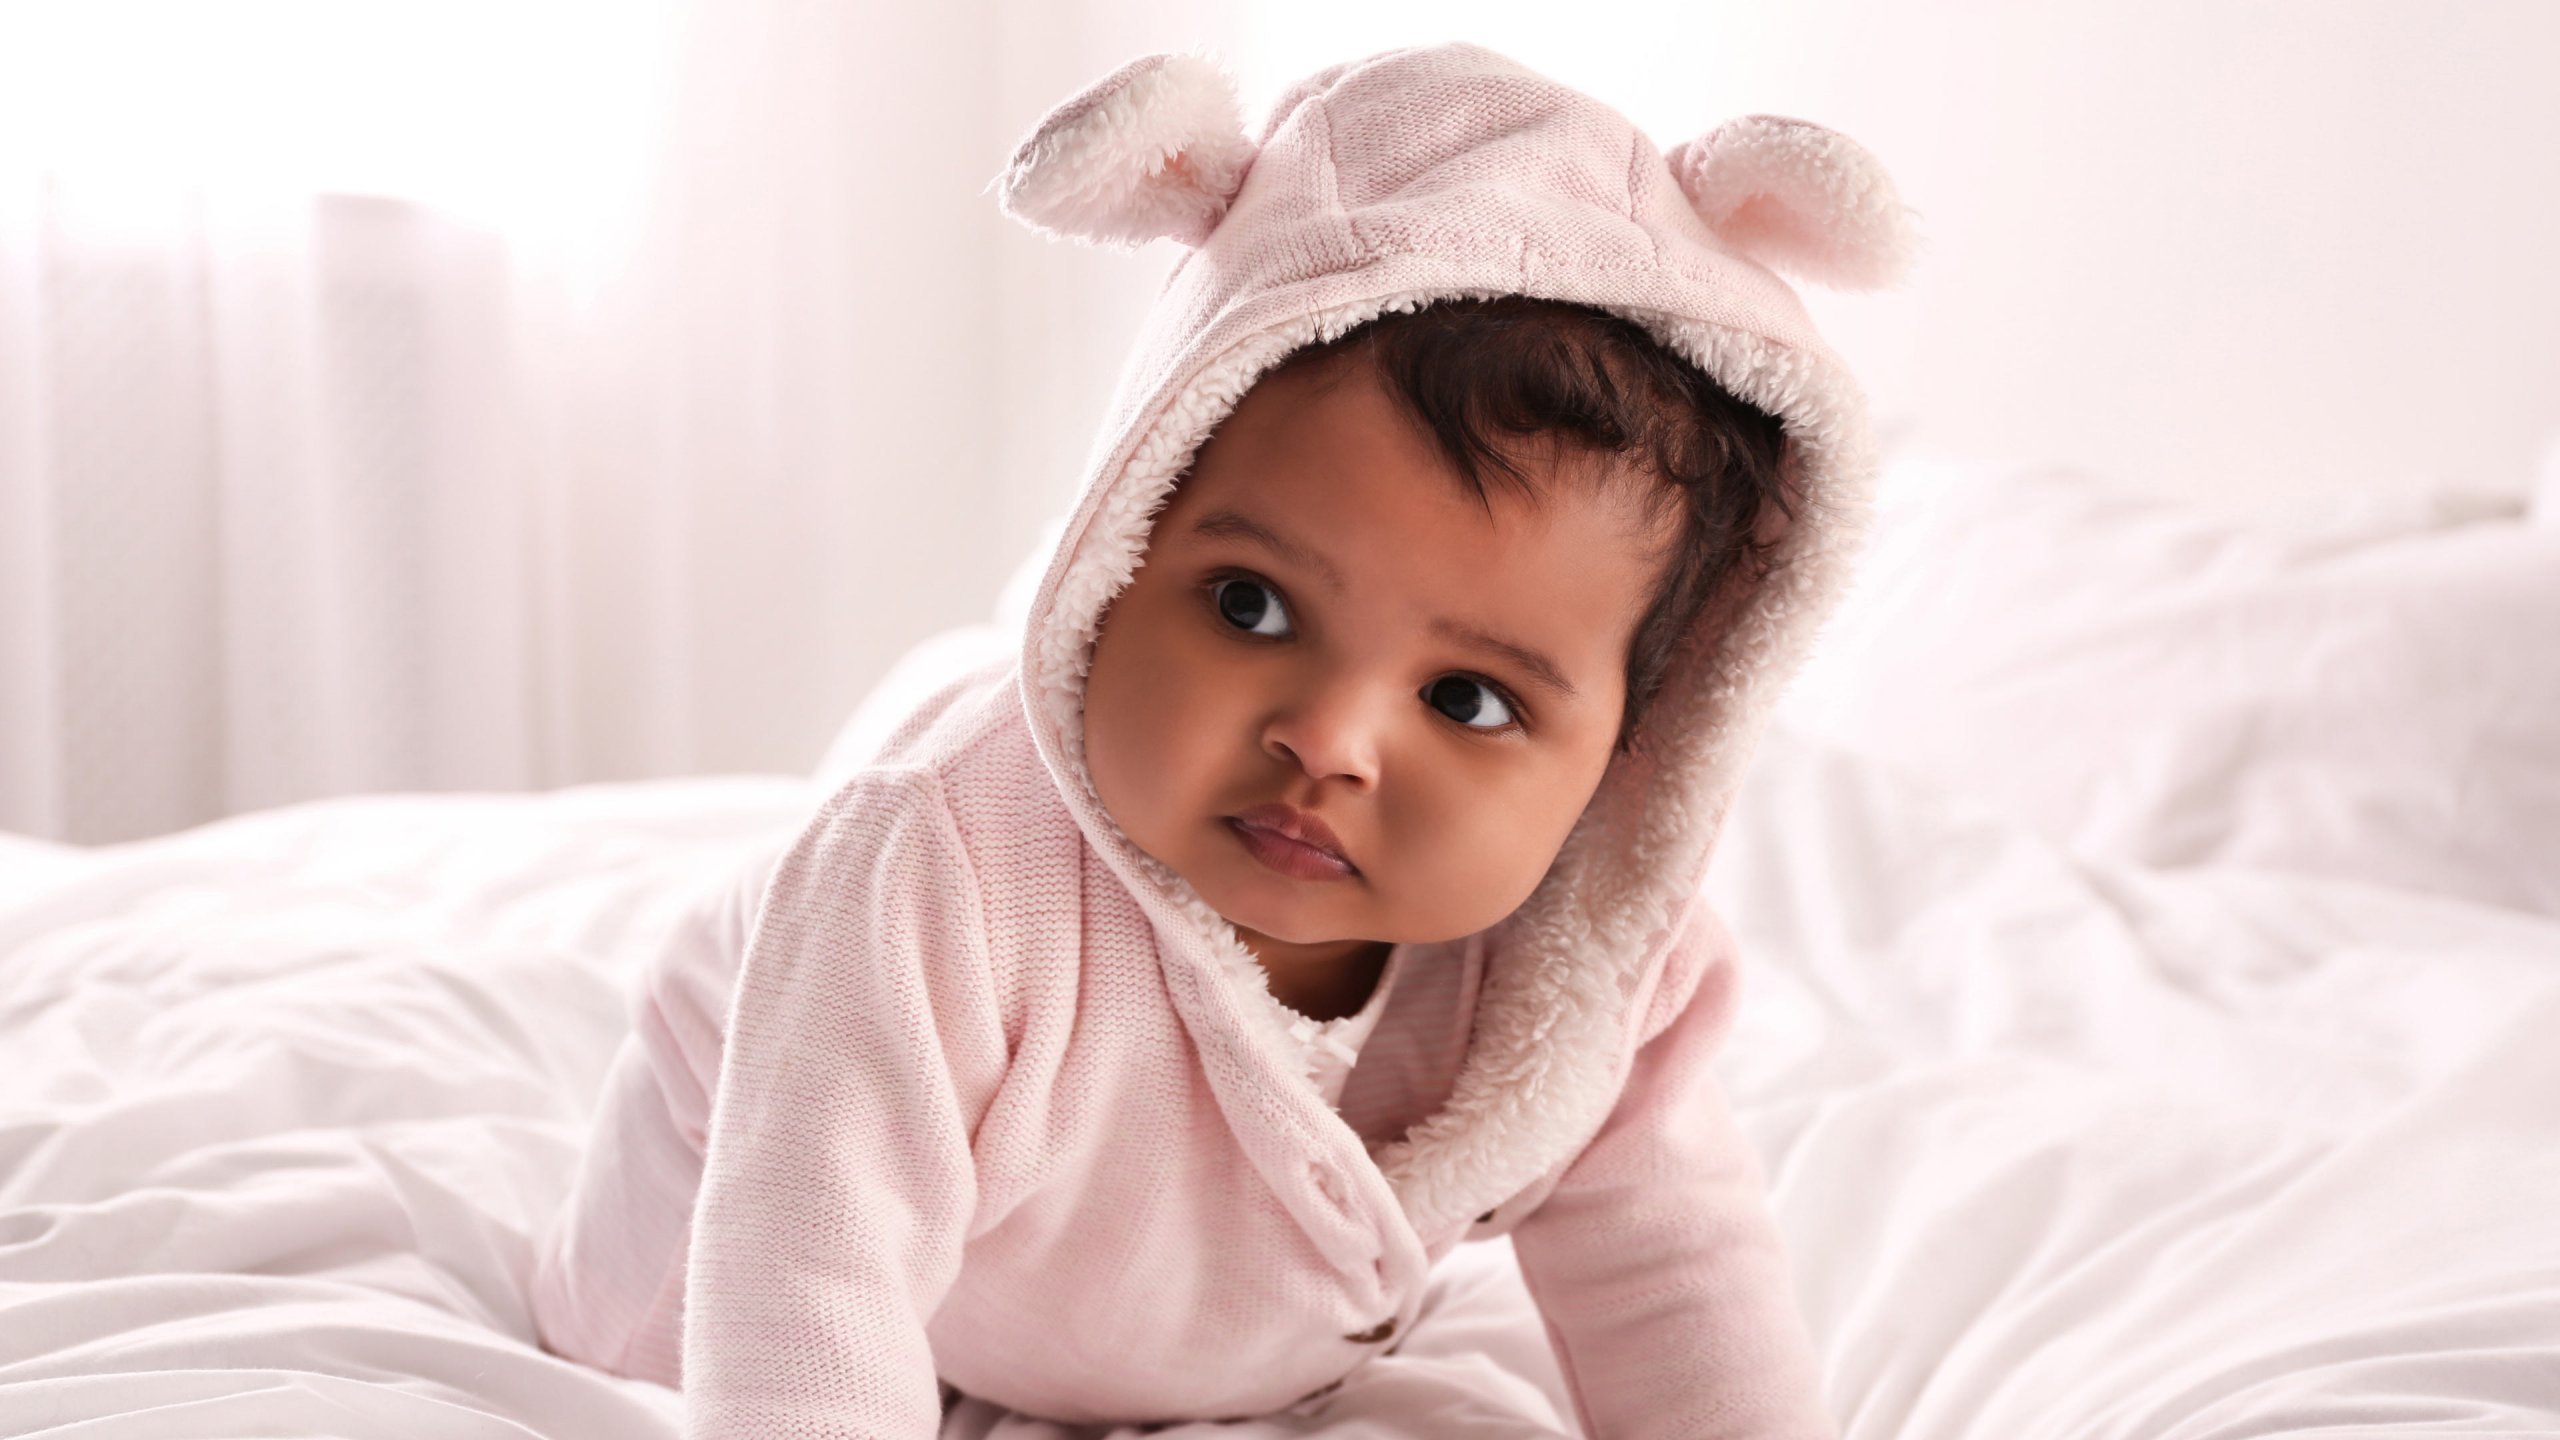 Excellent Reasons for Buying Organic Baby Clothing